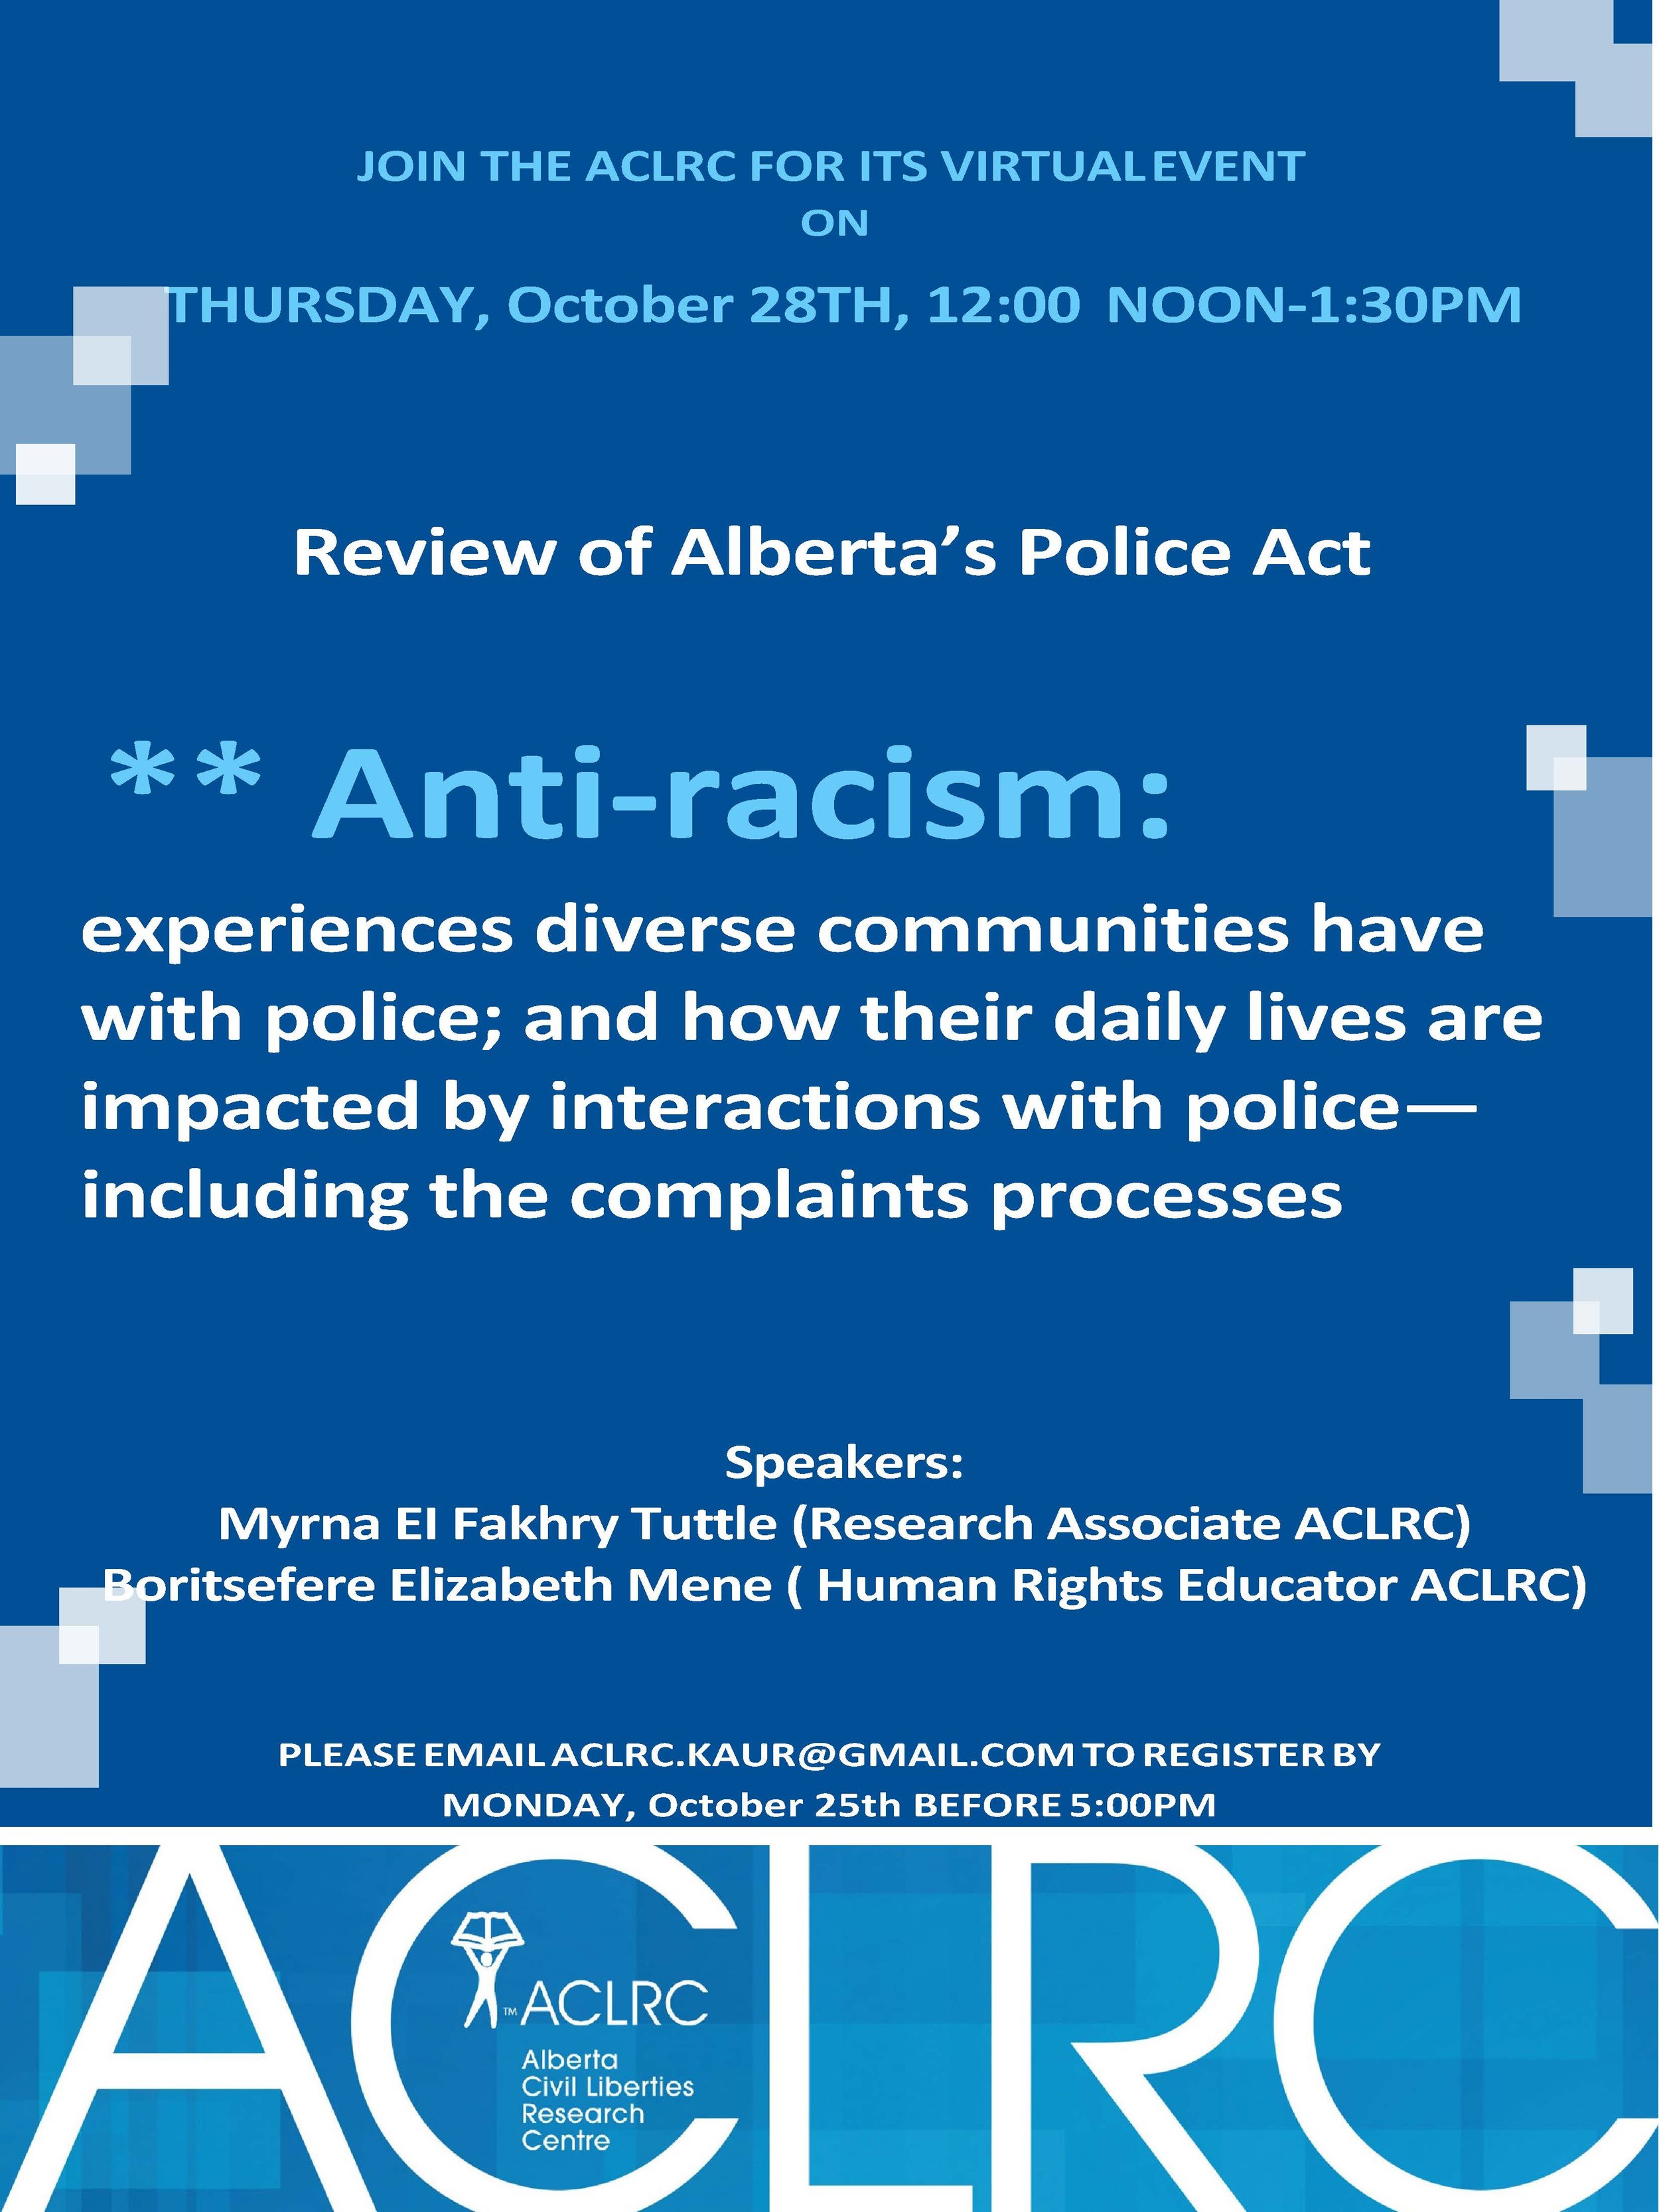 Review of Alberta's Police Act 2021